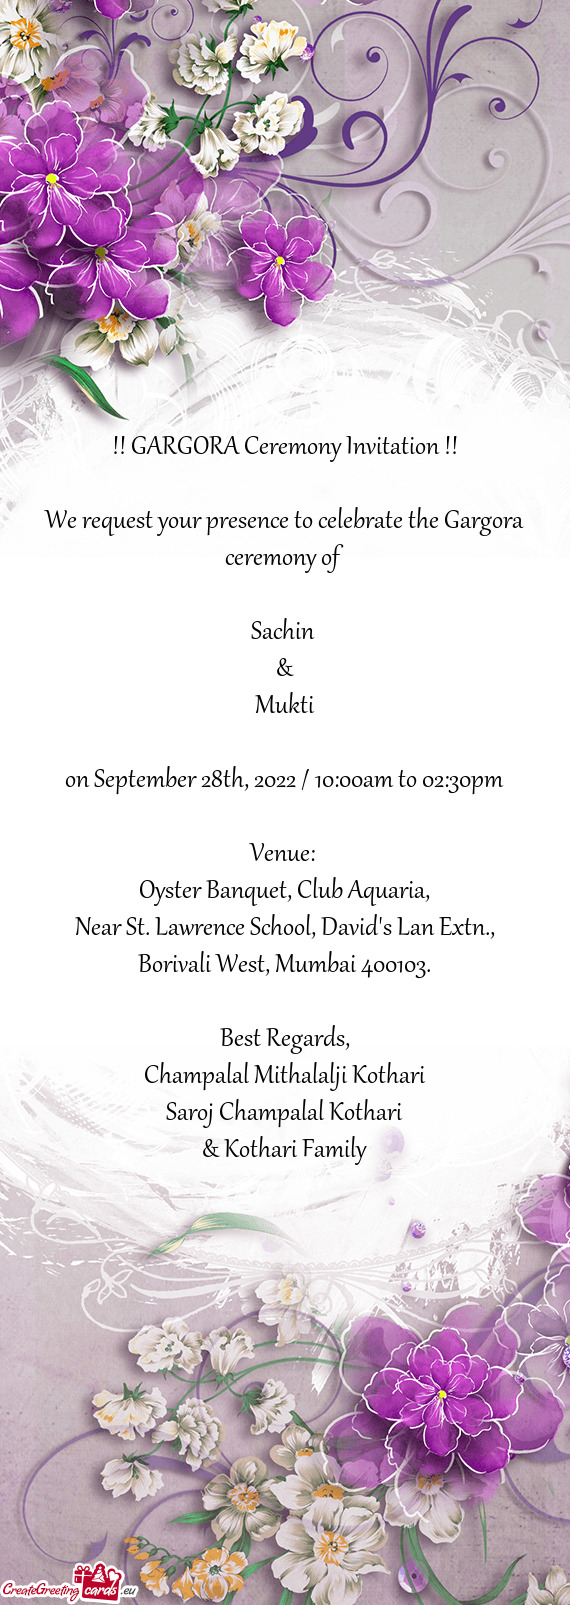 We request your presence to celebrate the Gargora ceremony of